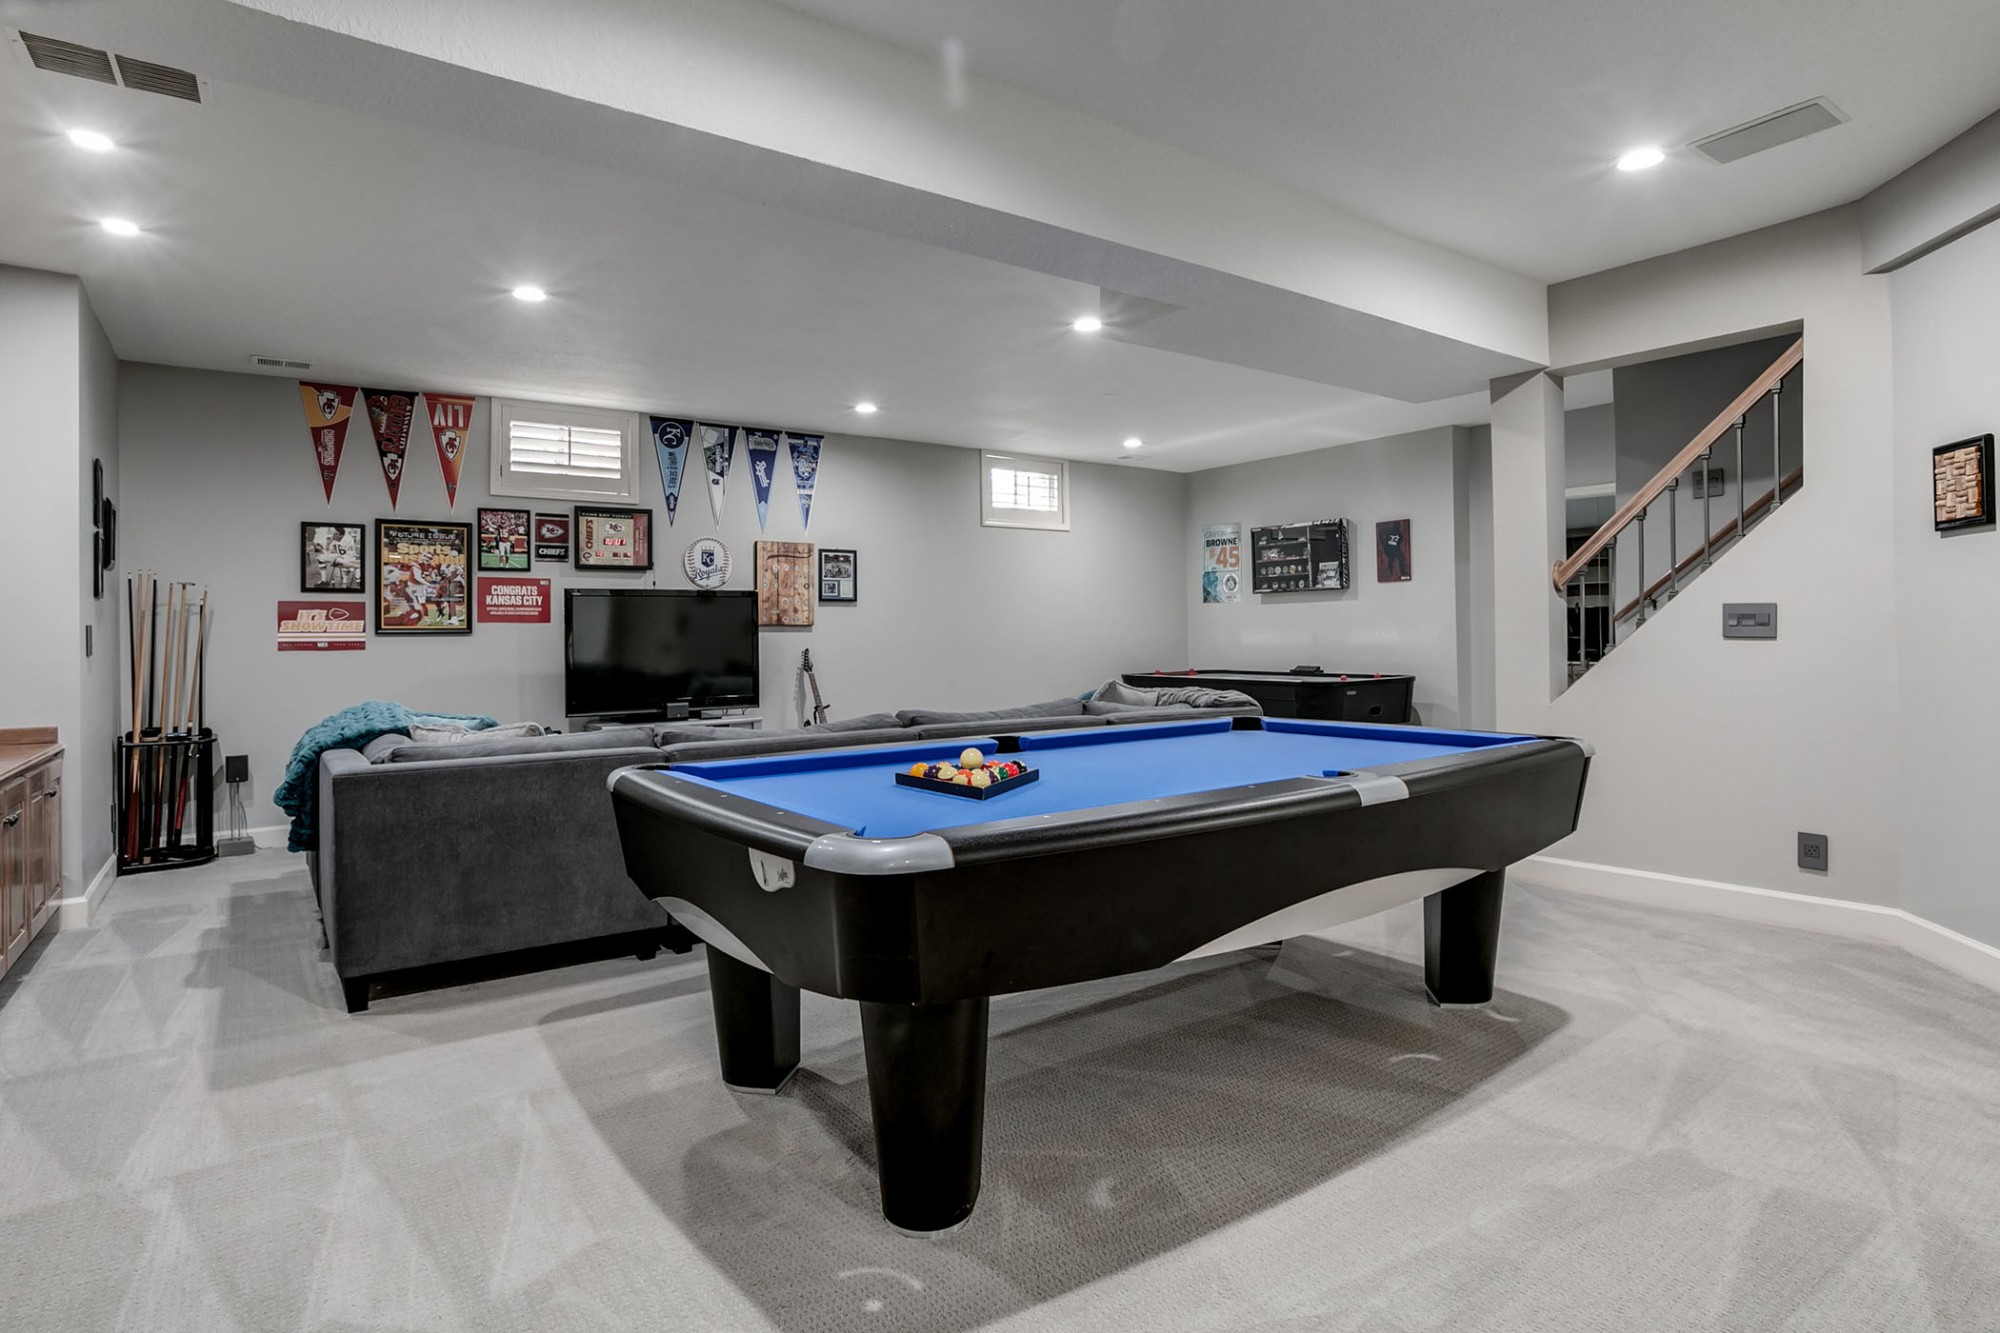 Plenty of room for pool or ping pong.